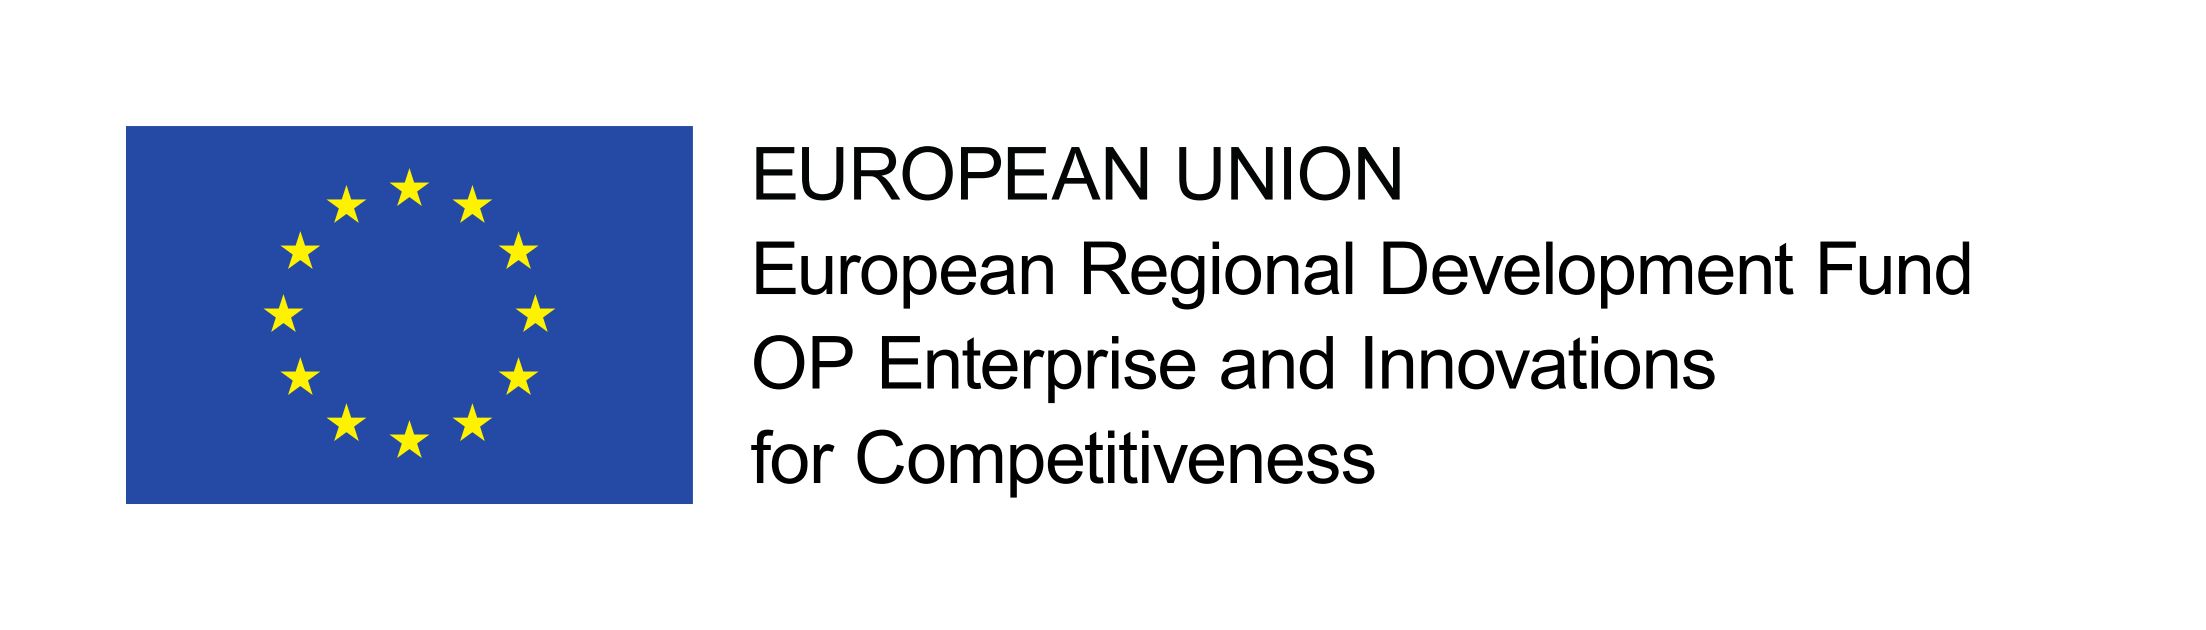 European Regional Development Fund OP Enterprise and Innovations for Competitiveness